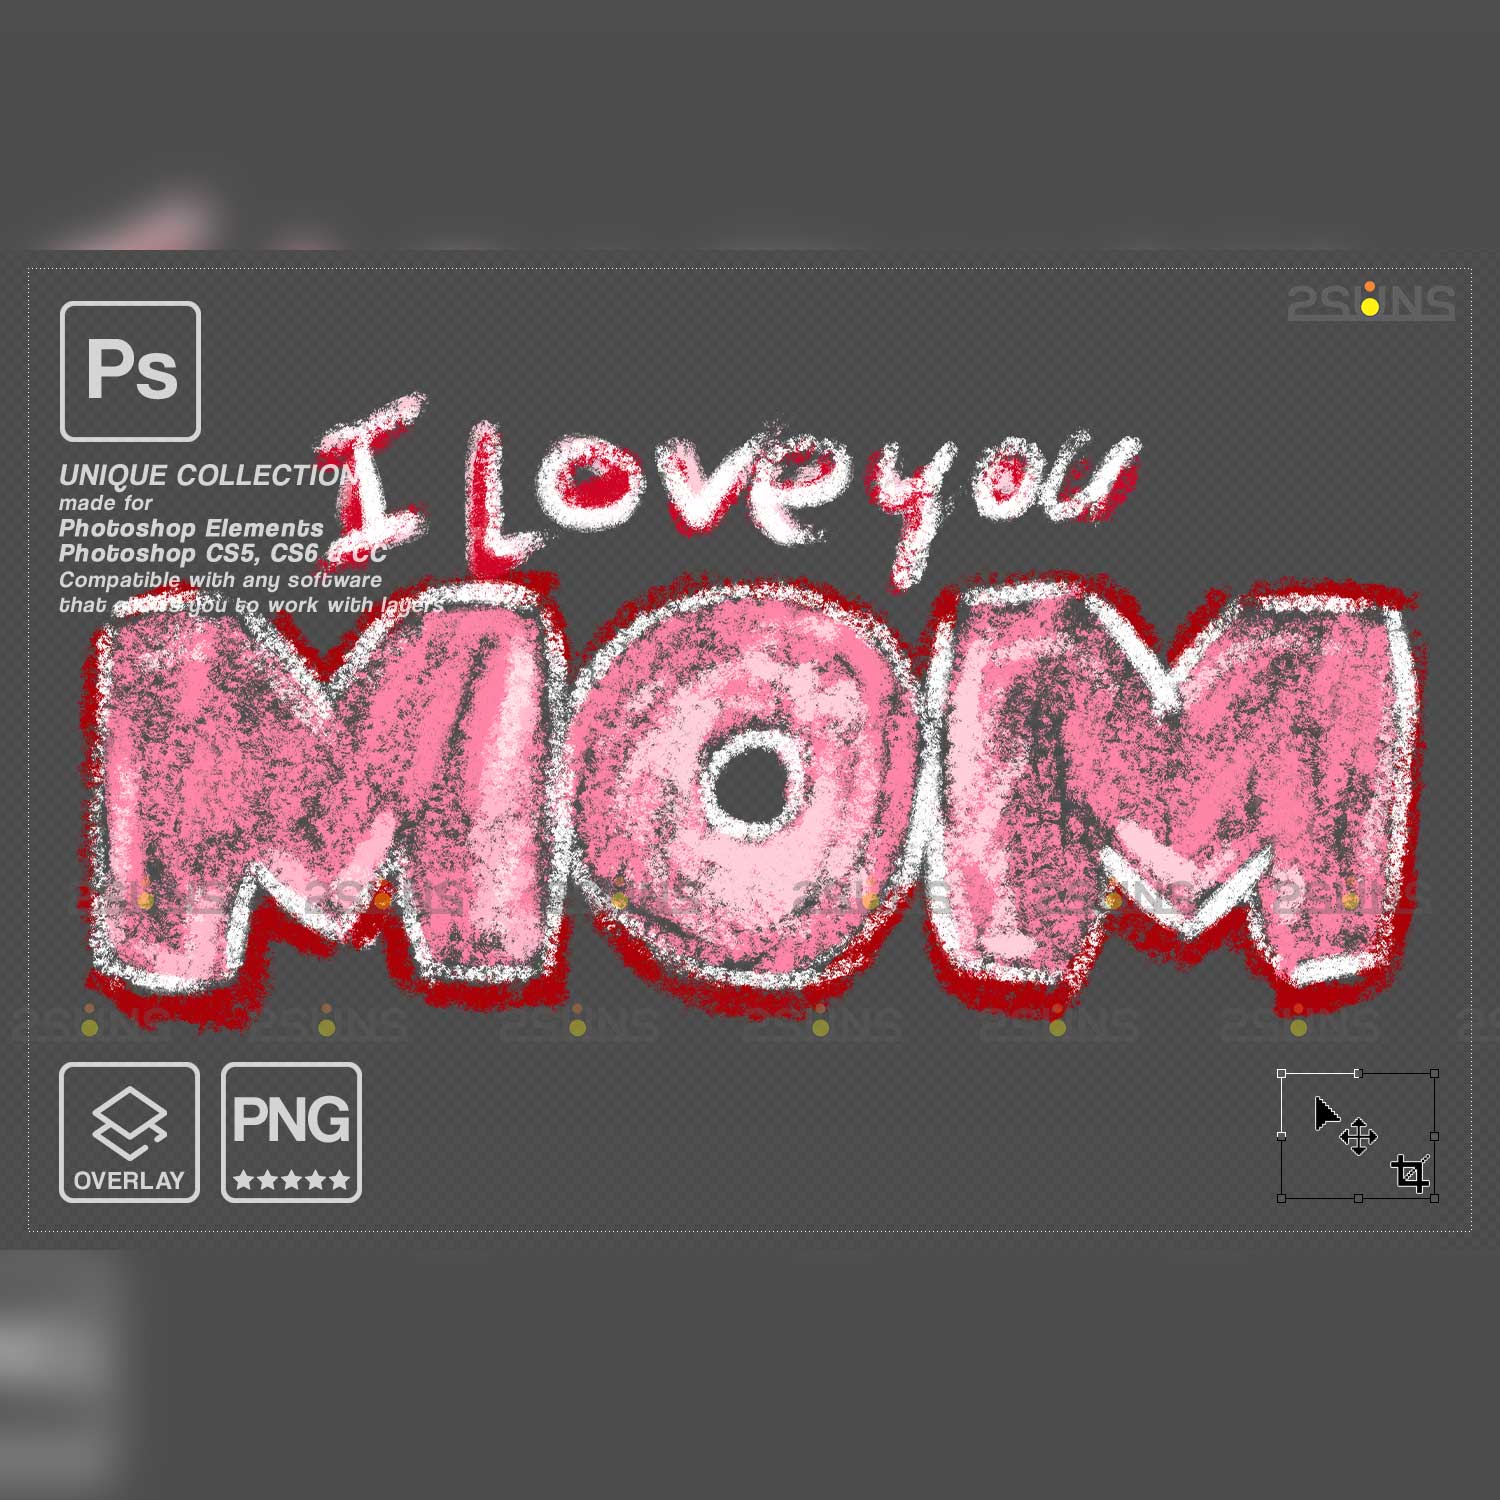 Colored Mothers Day Sidewalk Chalk Photoshop Overlay Text.